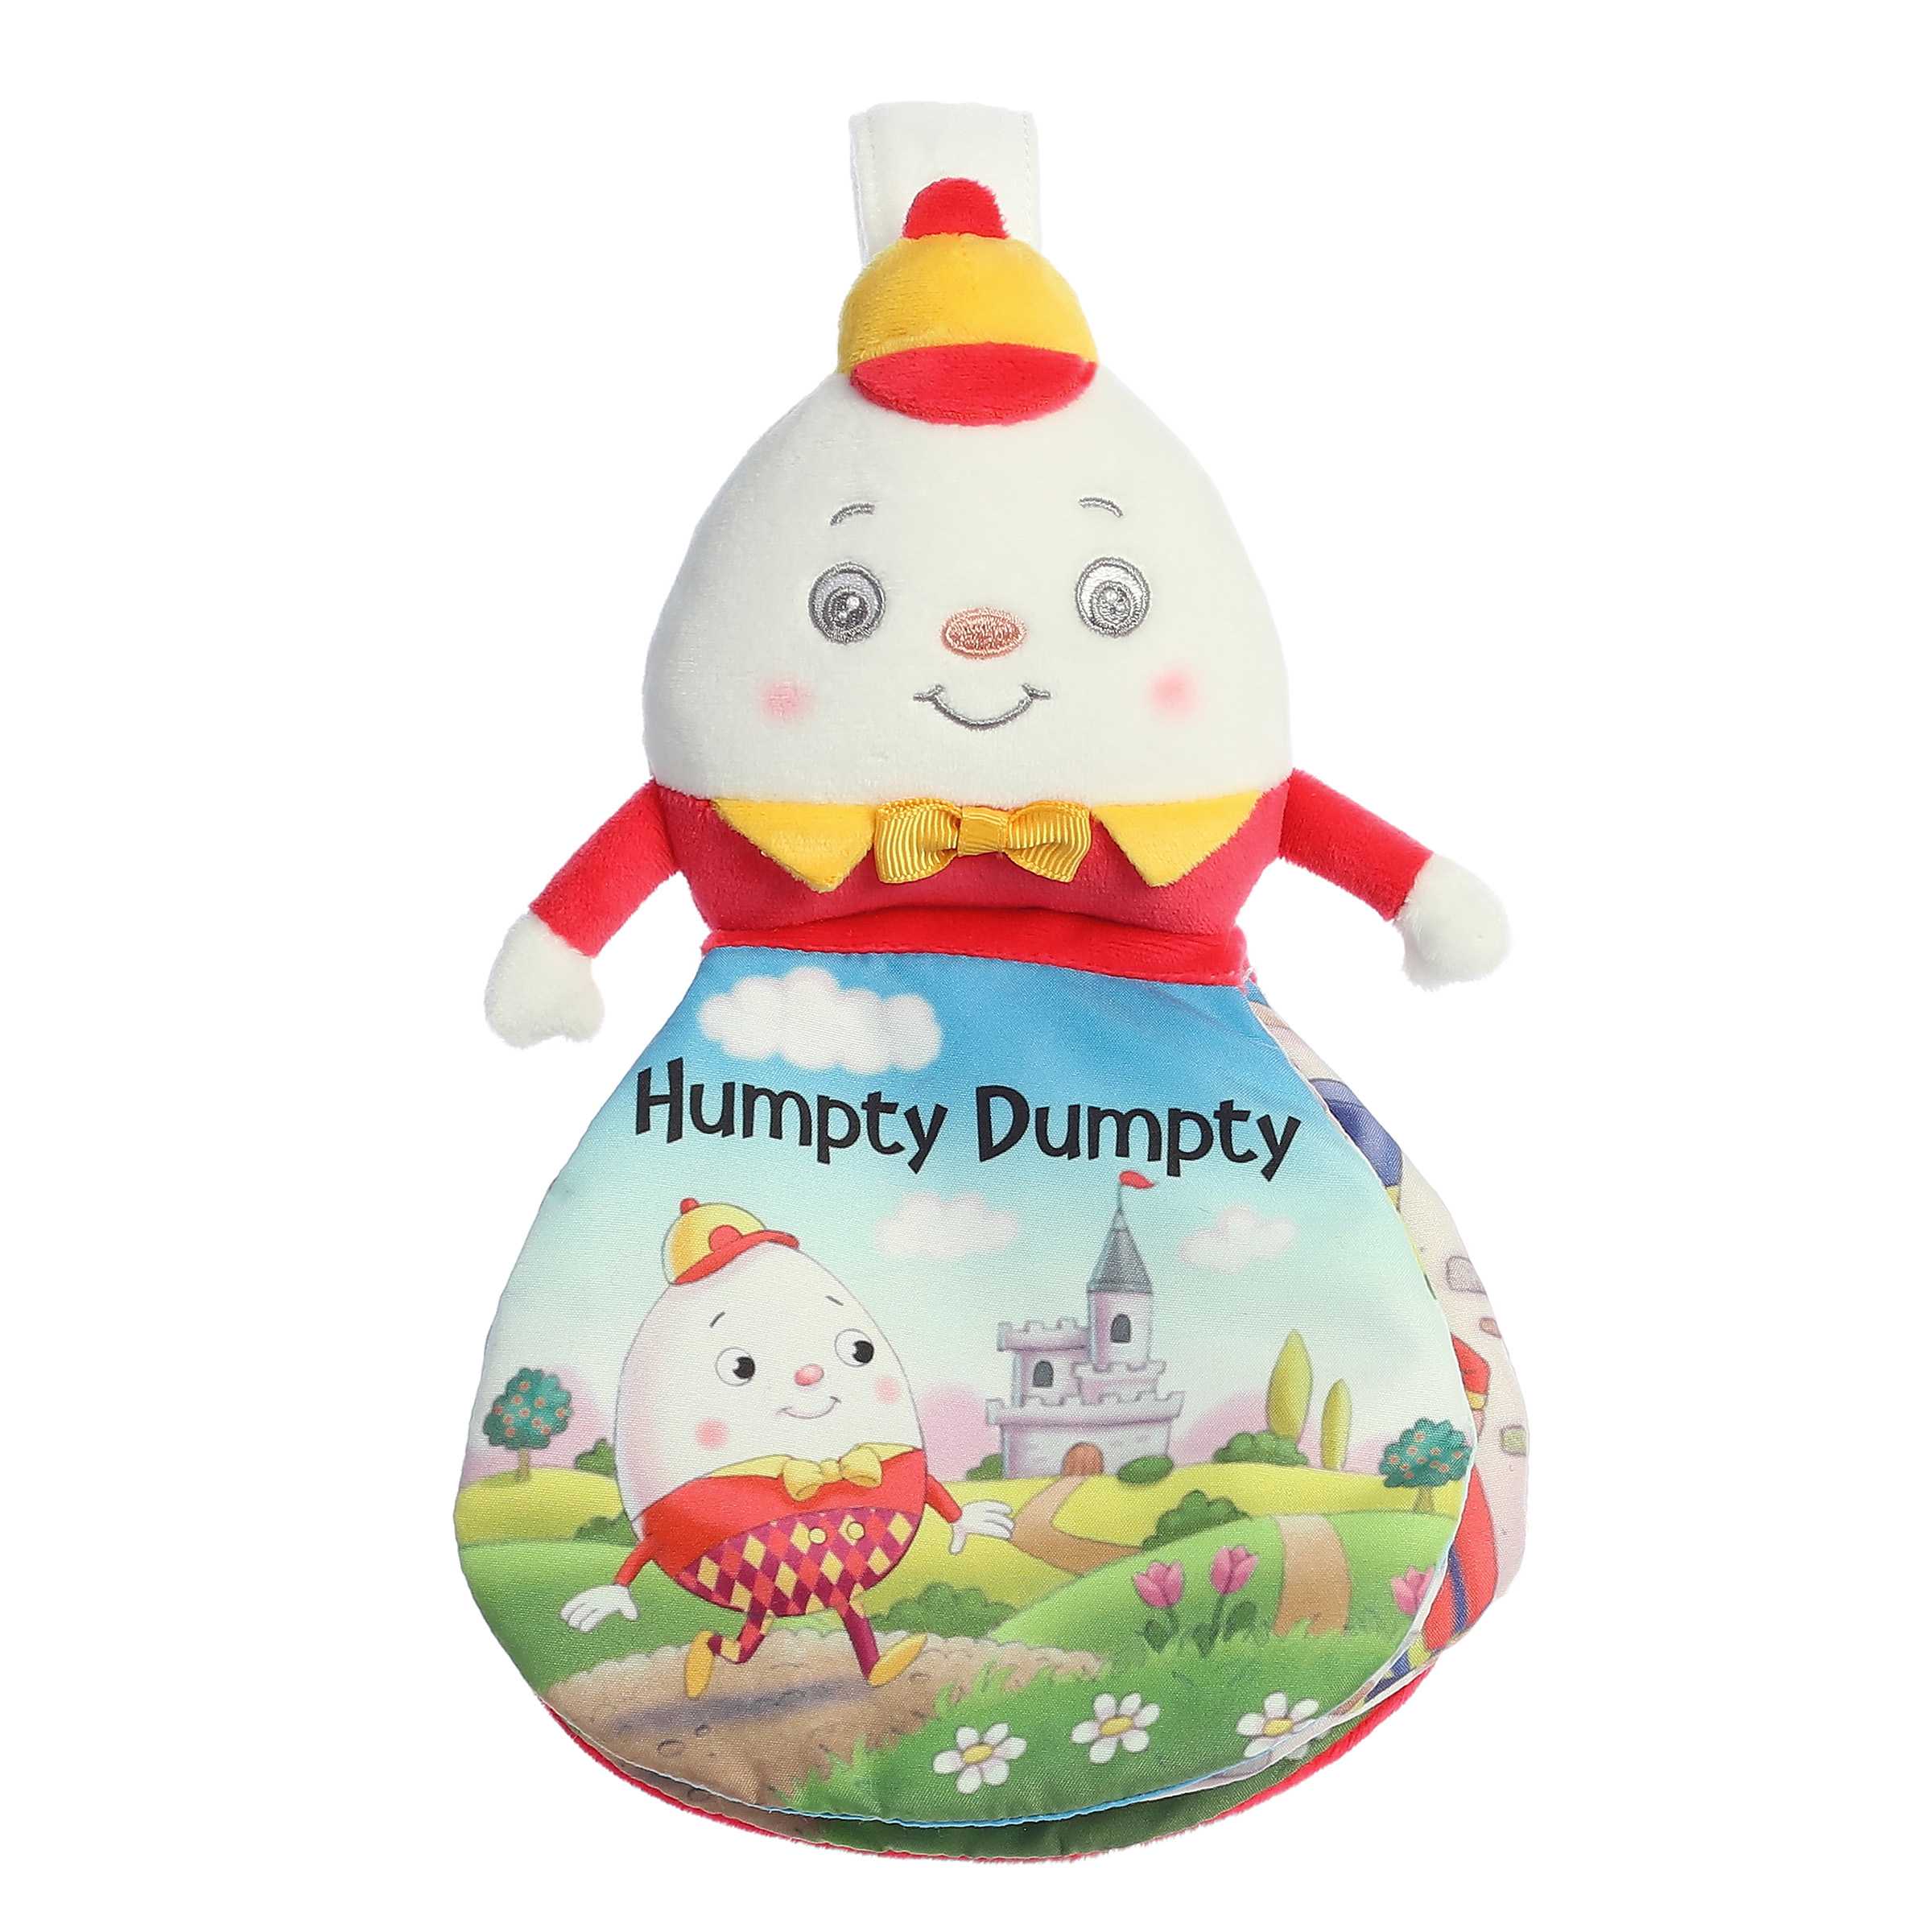 Playful Humpty Dumpty storybook with crinkly pages and pictures, attached hook, and with an egg wearing a red suit